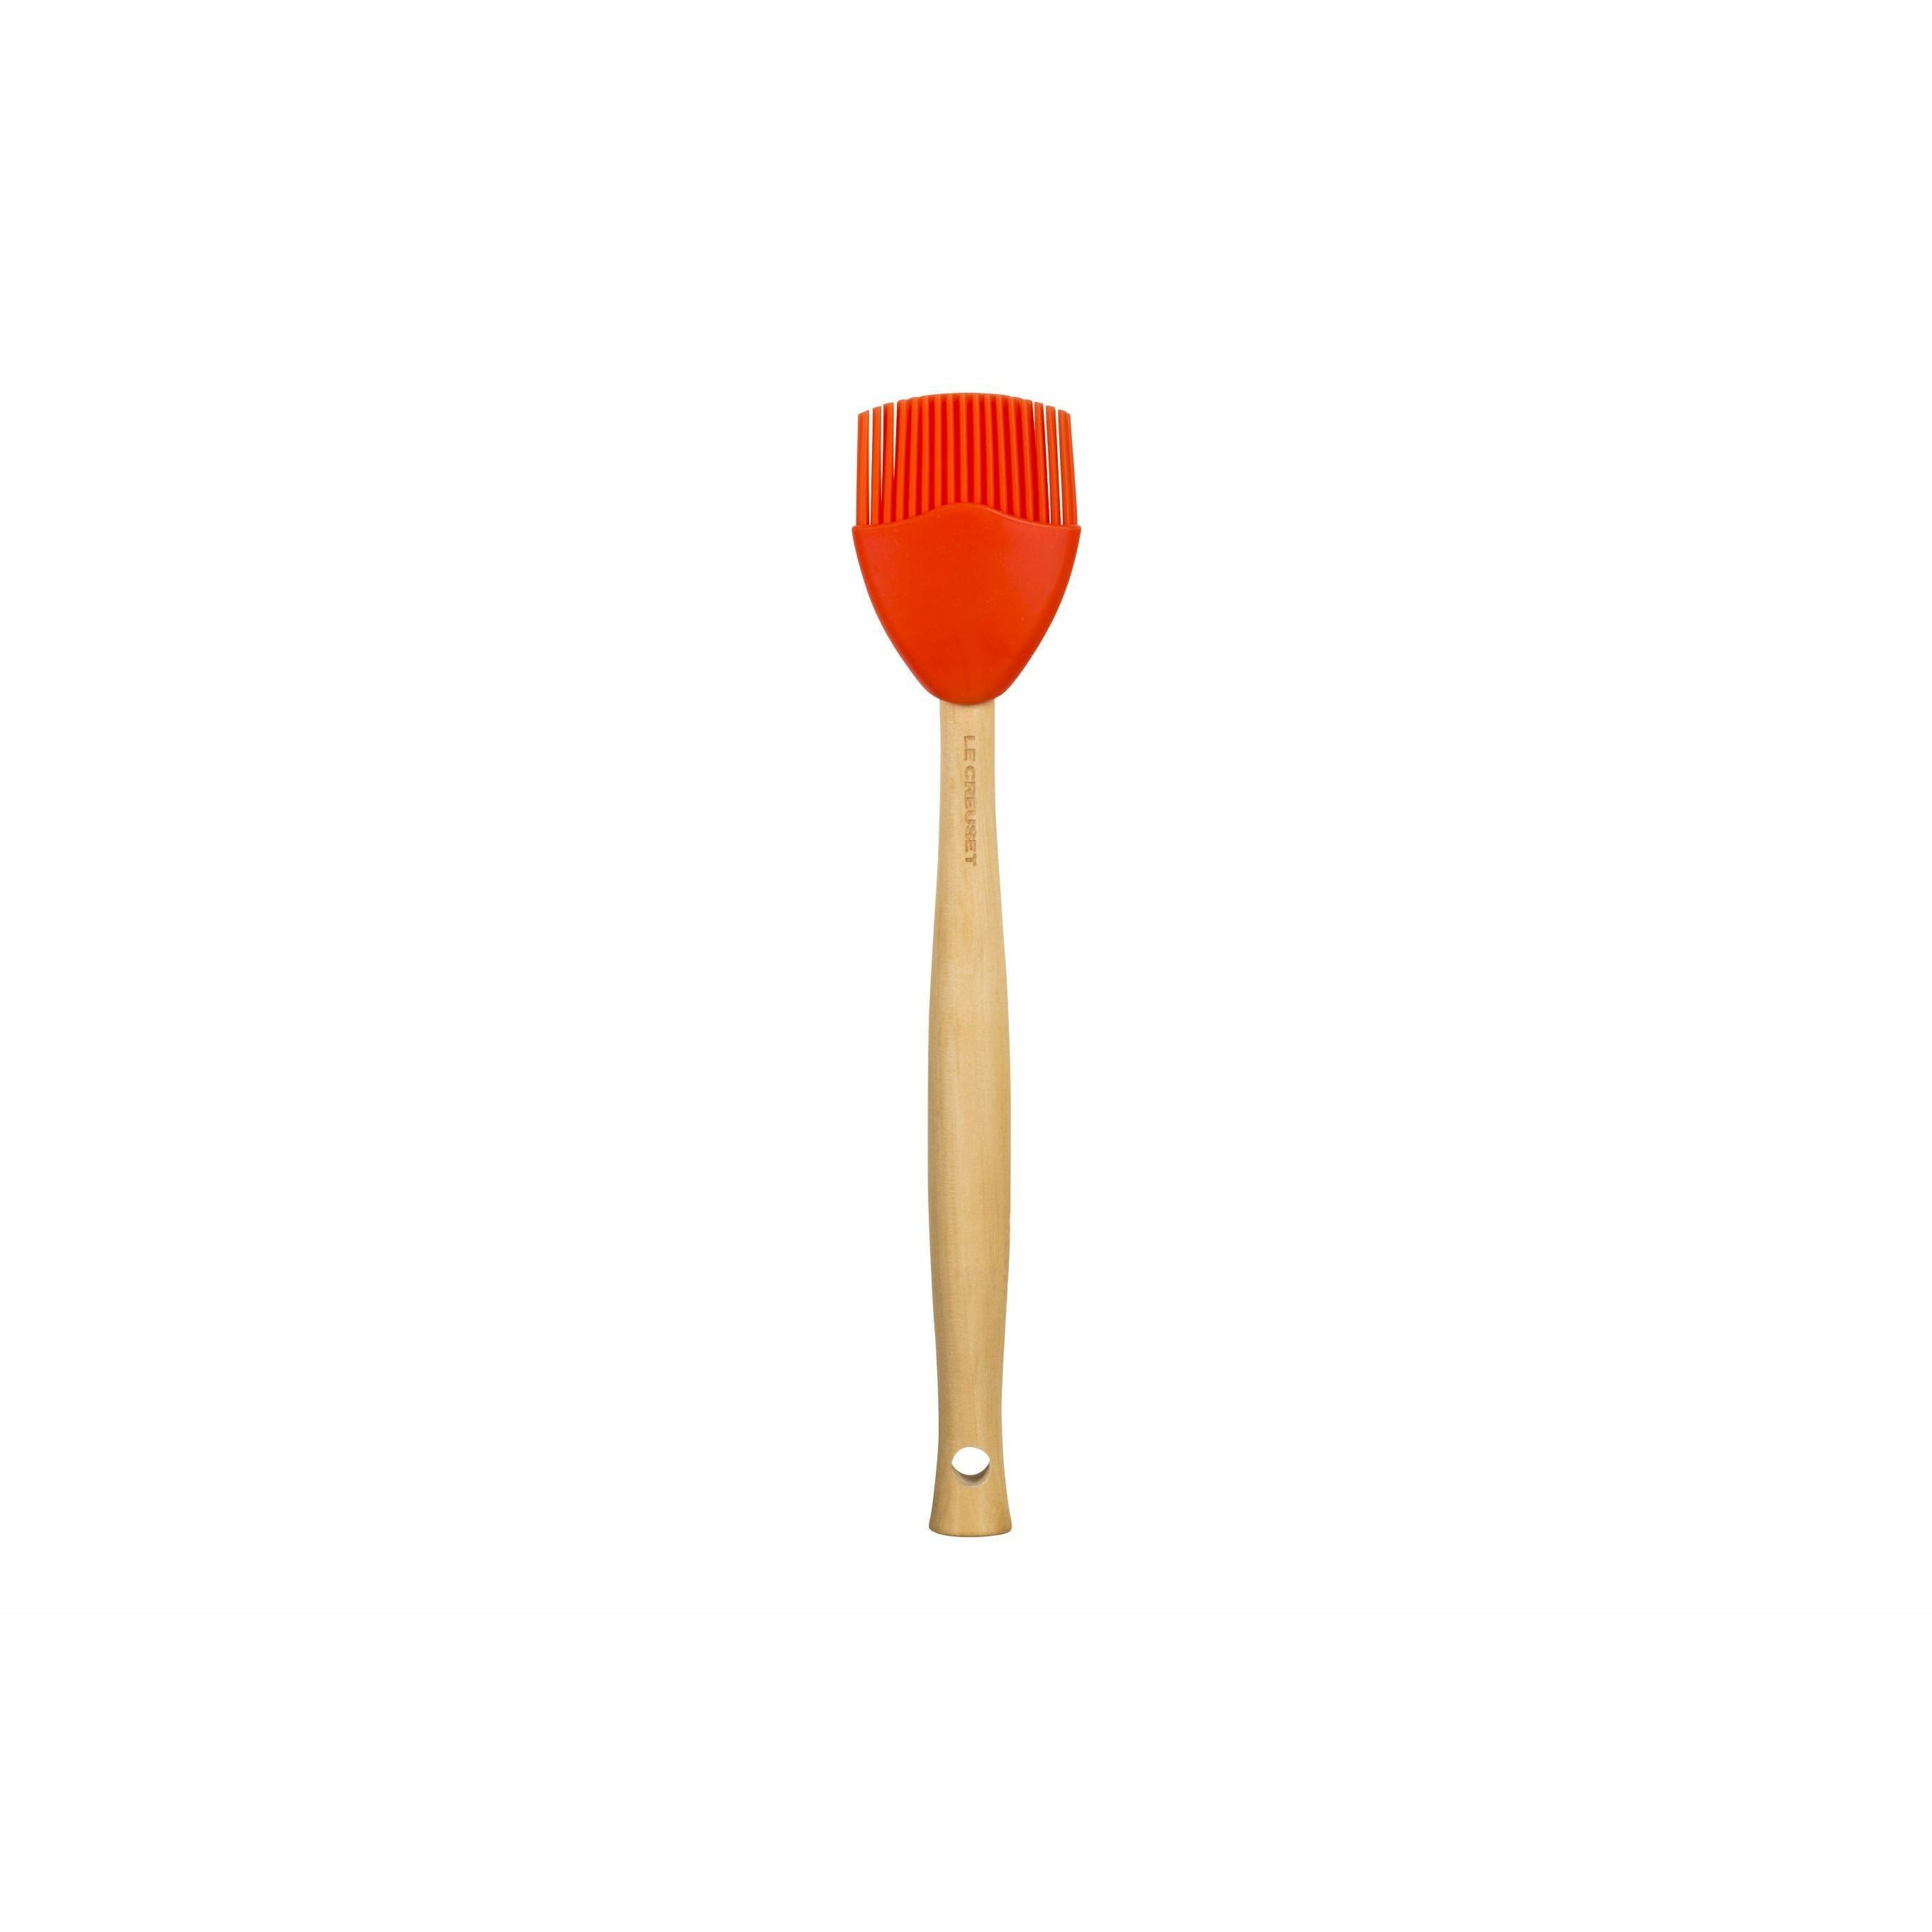 Le Creuset Baking Brush Craft, Oven Red